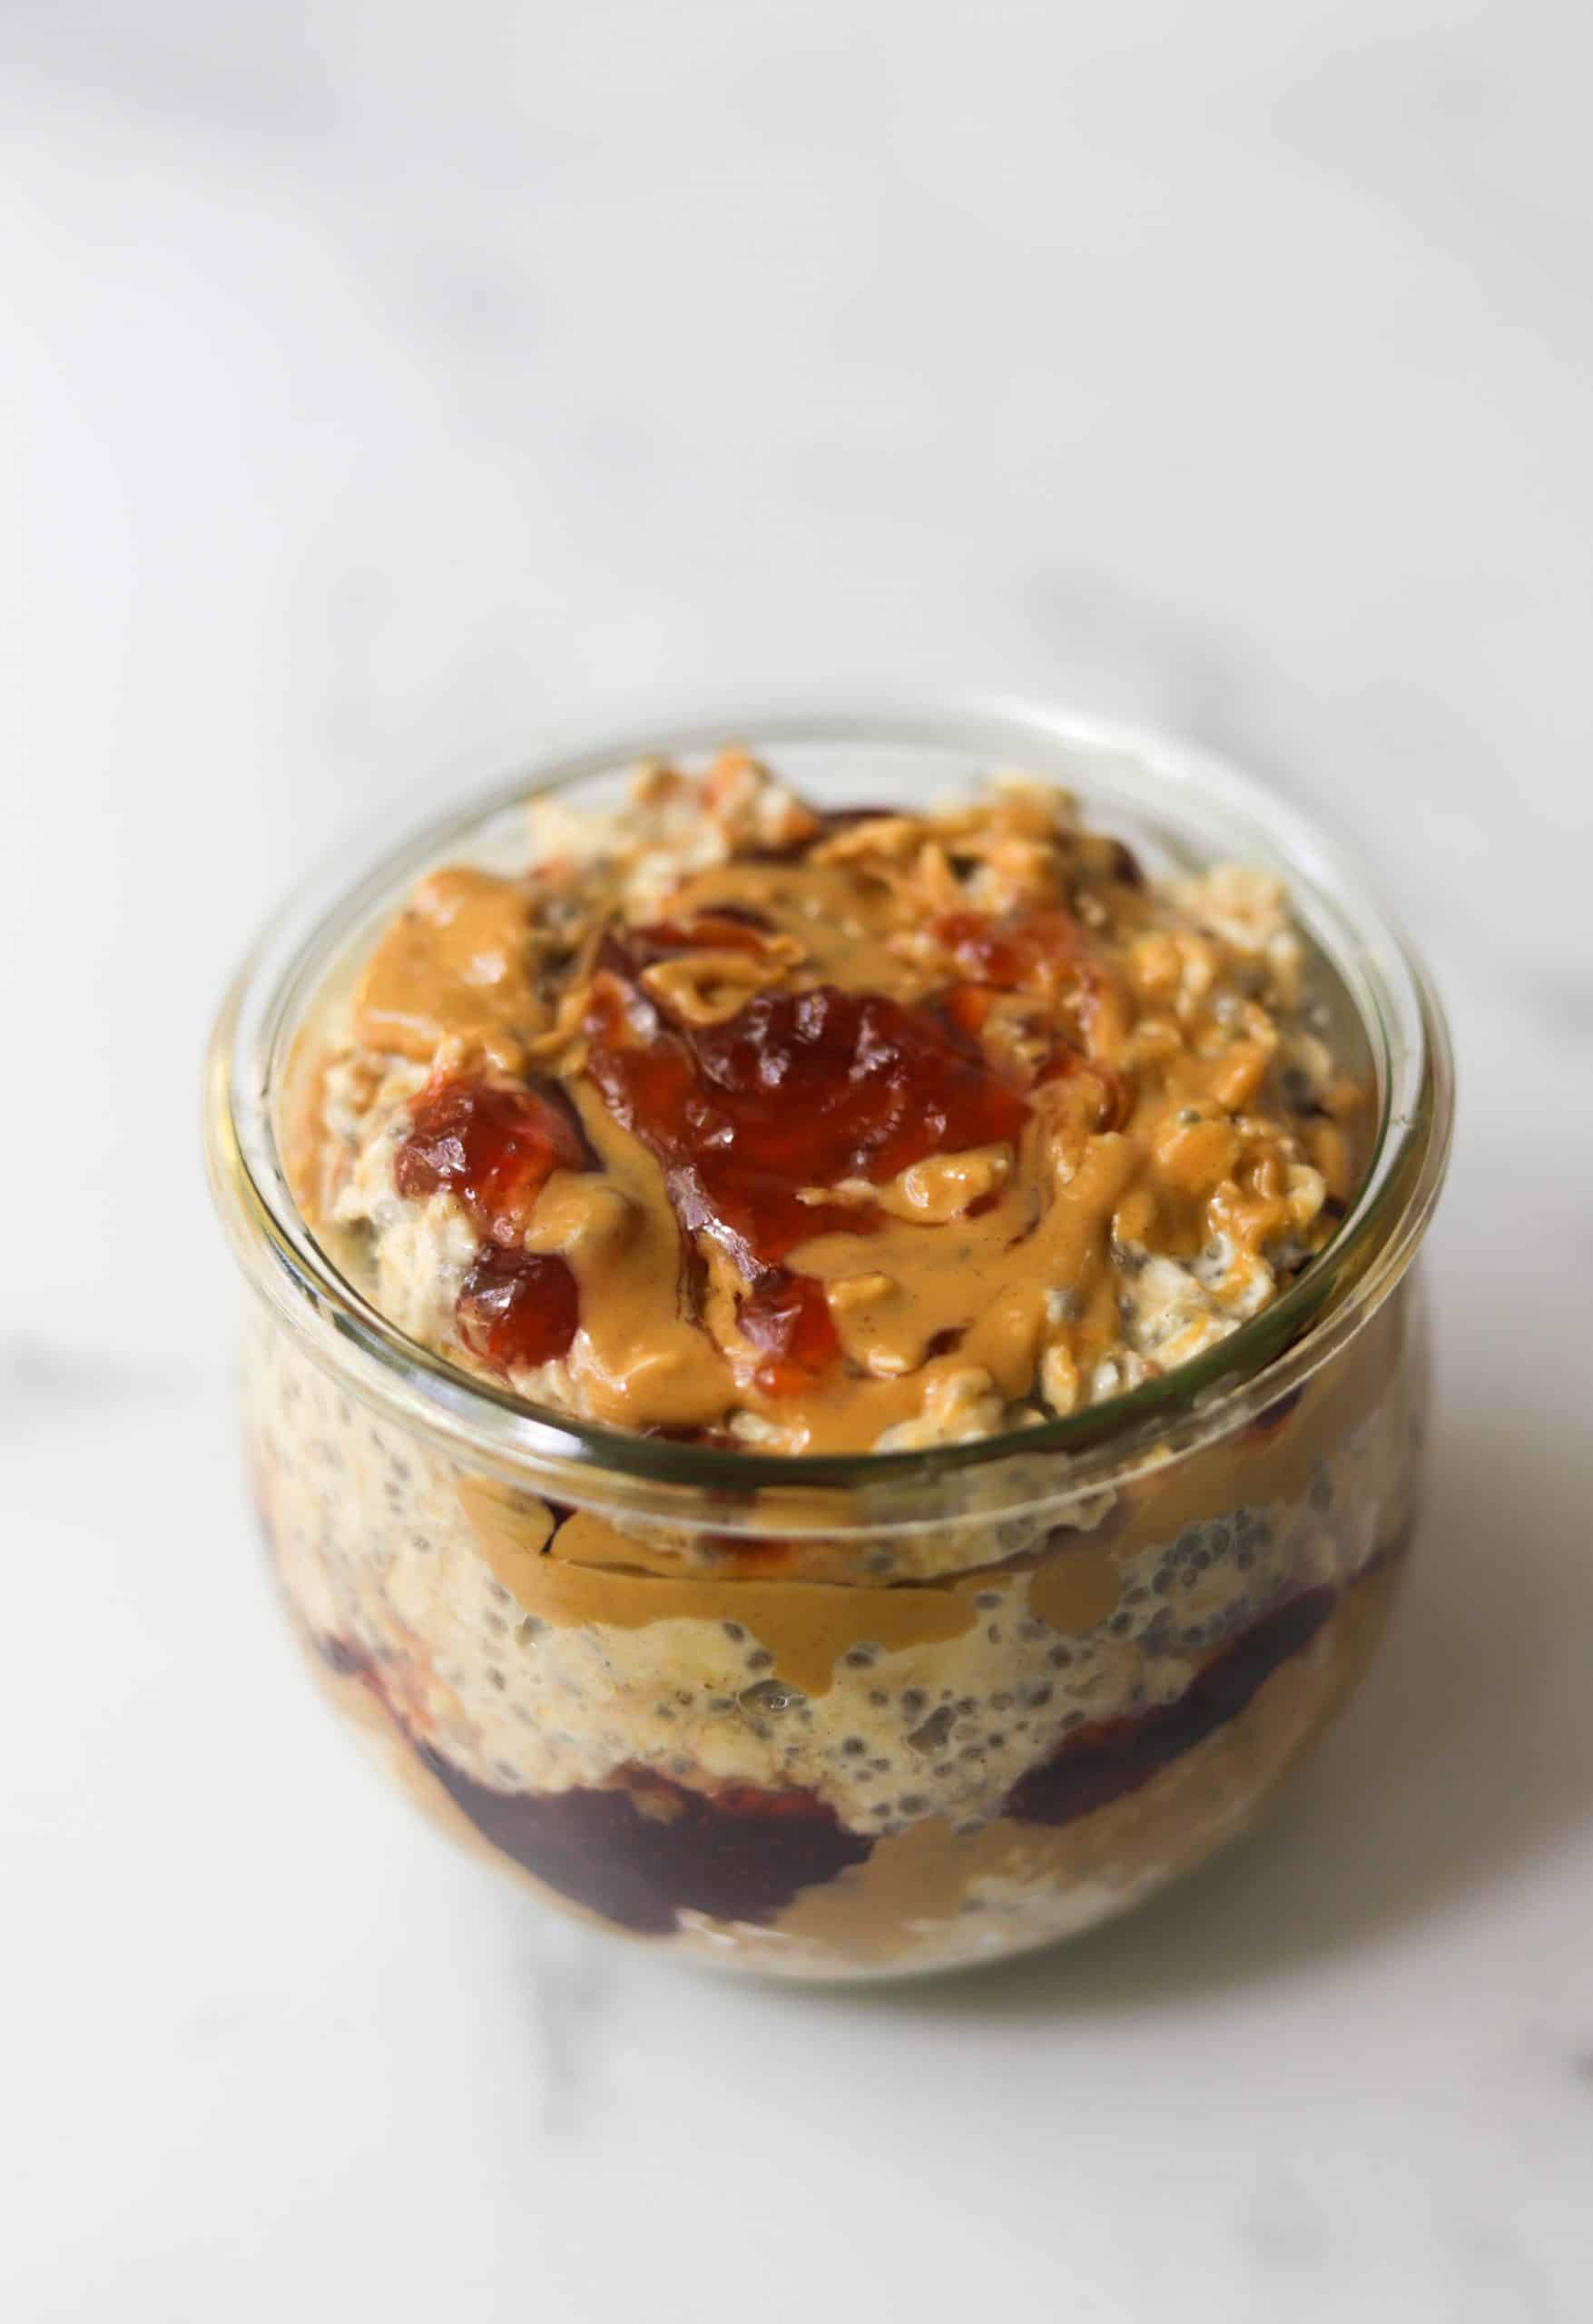 A side shot of a jar of peanut butter and jelly overnight oats.